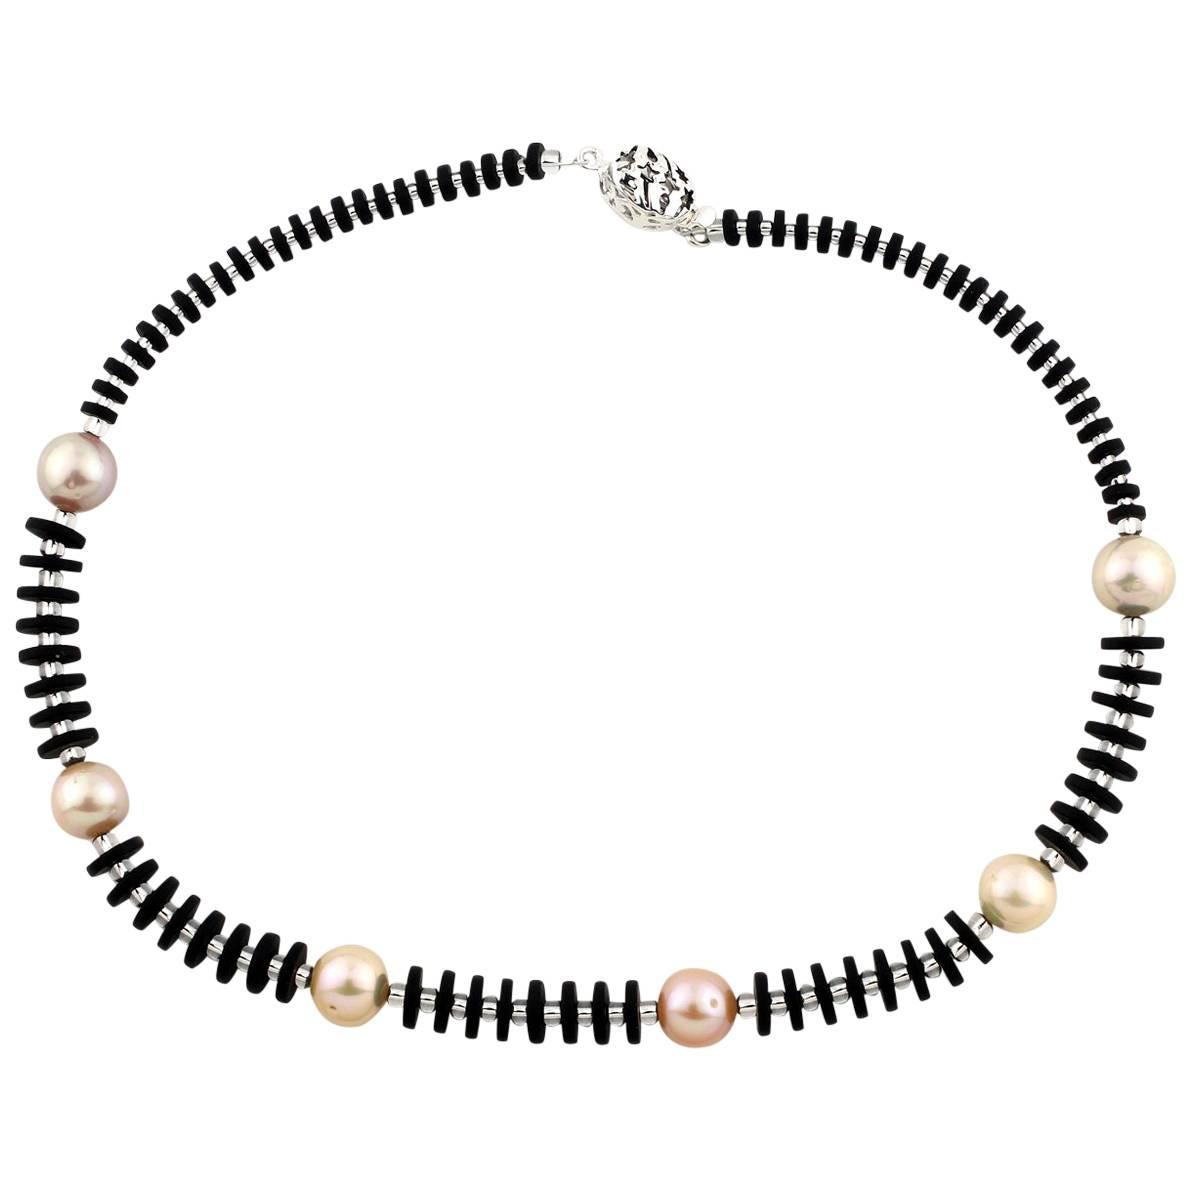 AJD Gorgeous Magnificent Elegant Natural Black Onyx & Peachy Pearl Necklace